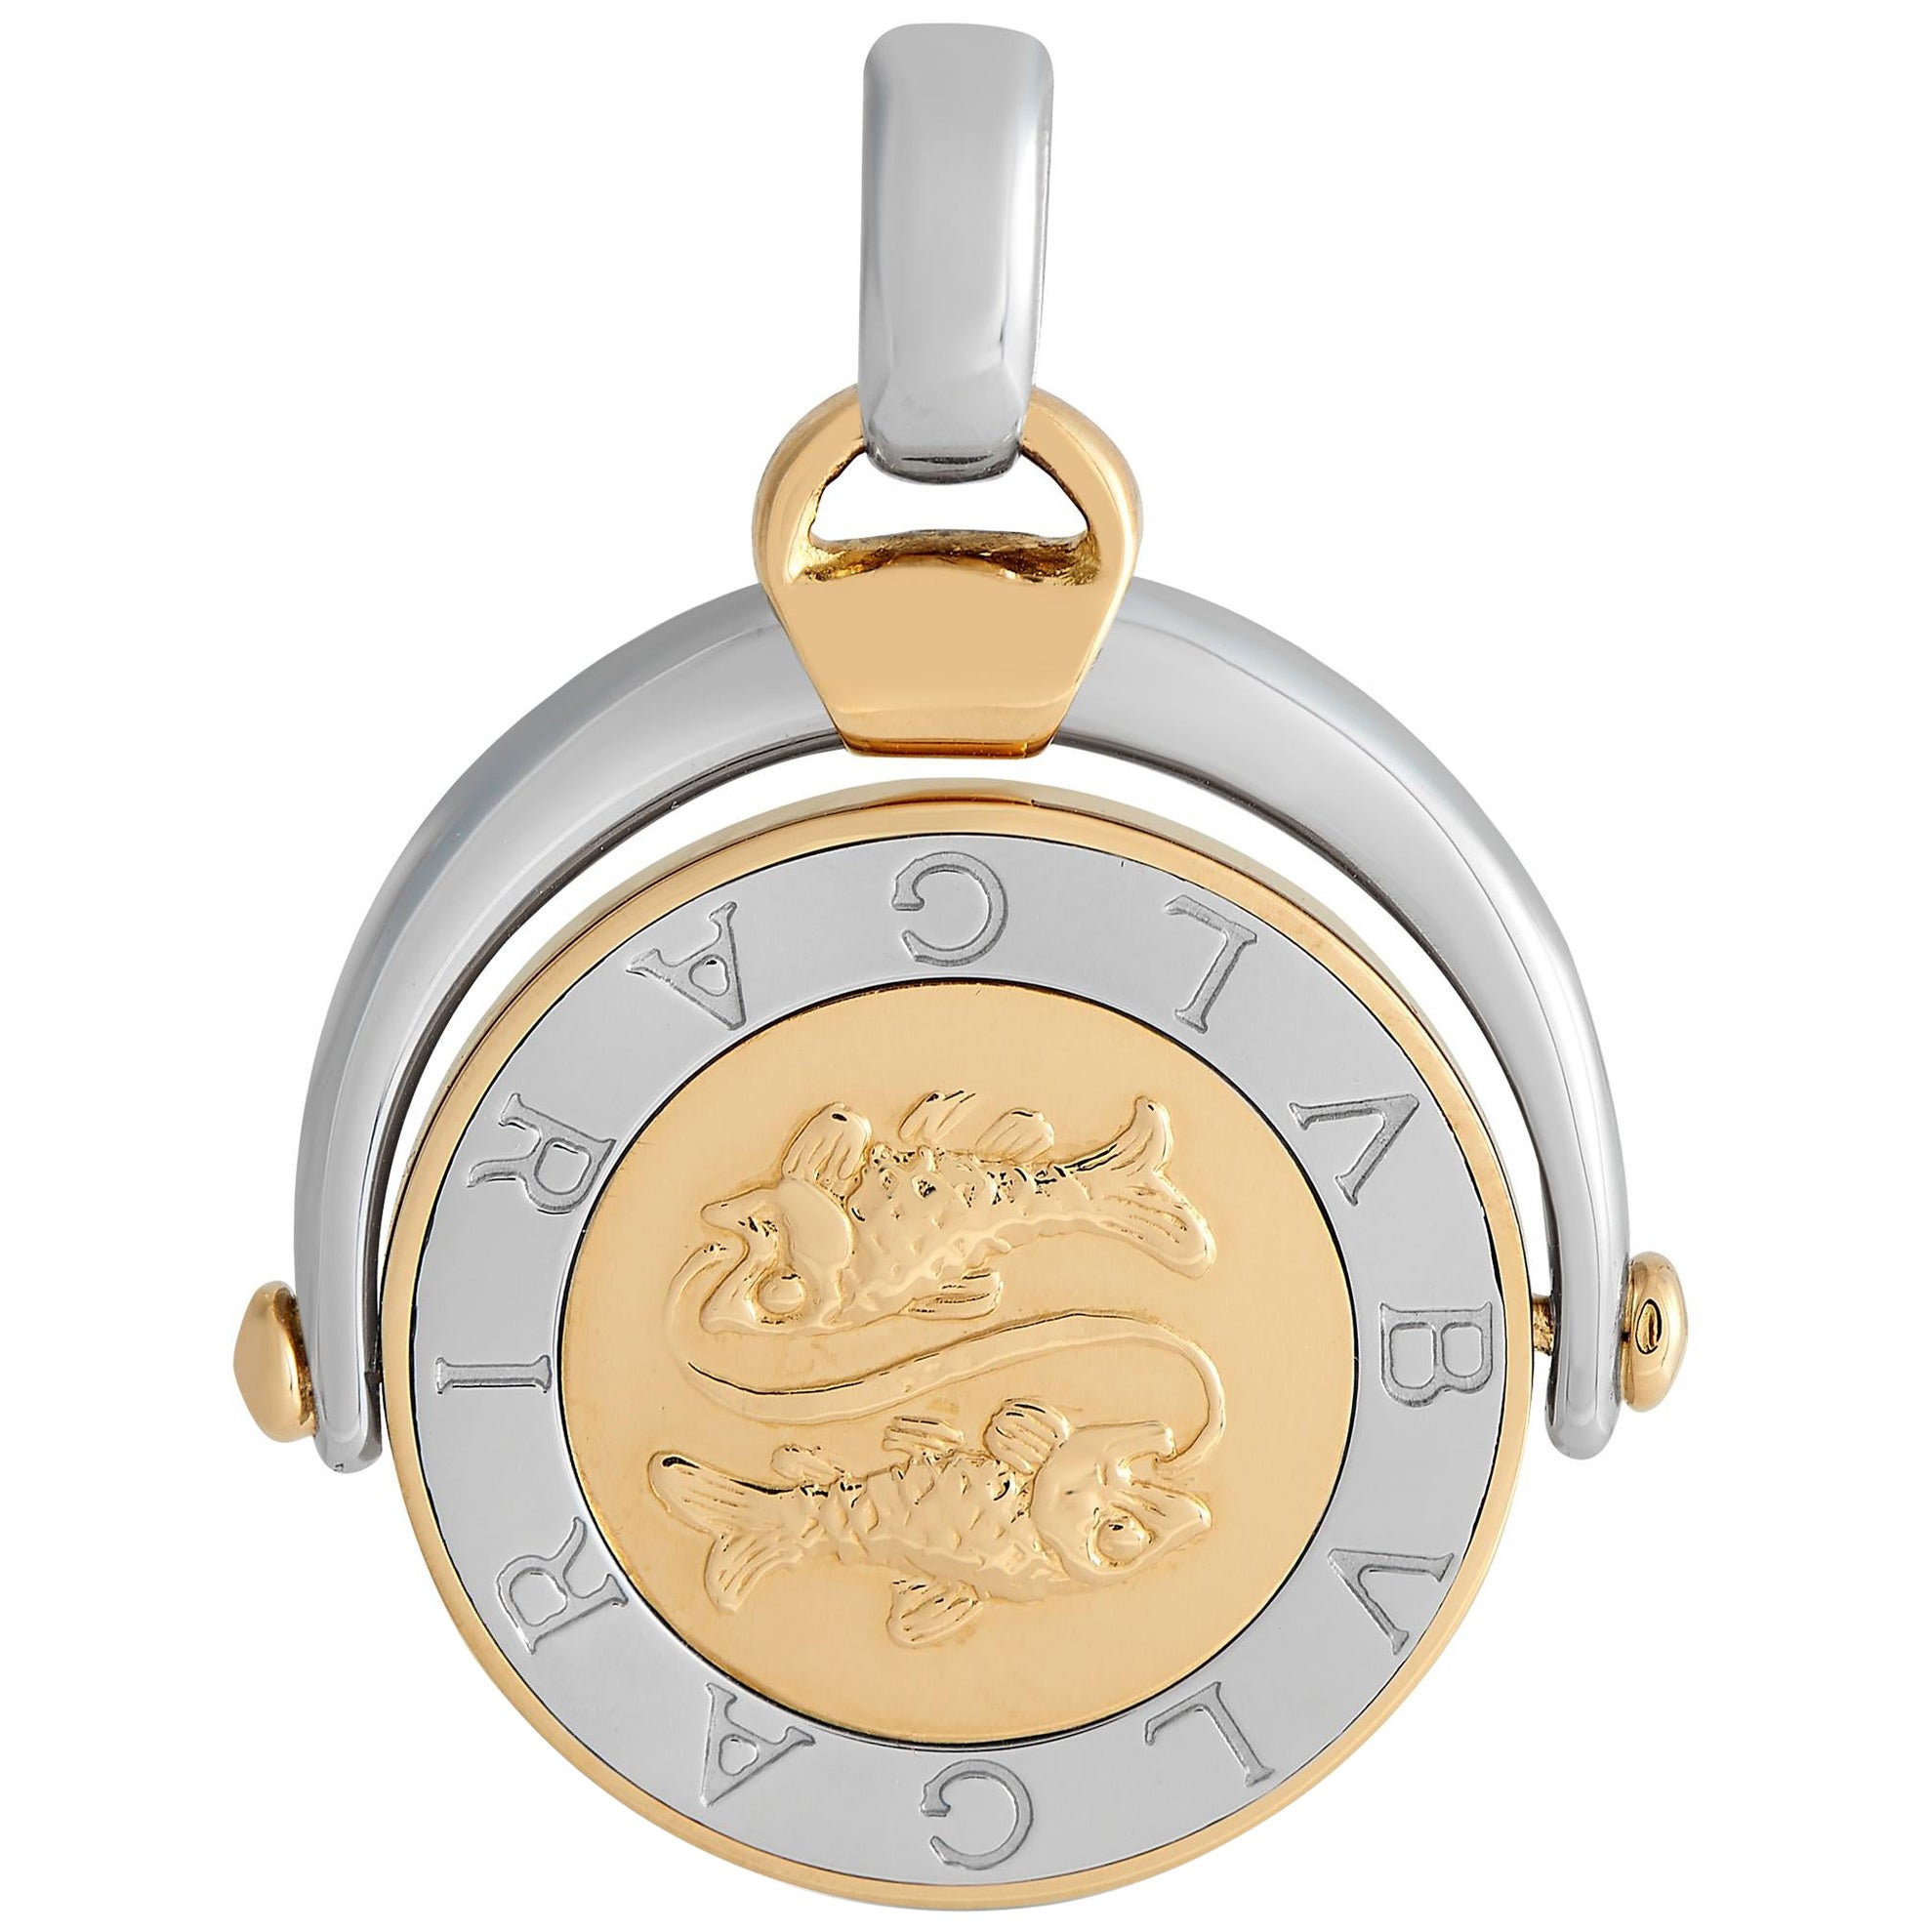 Bvlgari 18K Yellow Gold and Stainless Steel Pisces Zodiac Sign Pendant